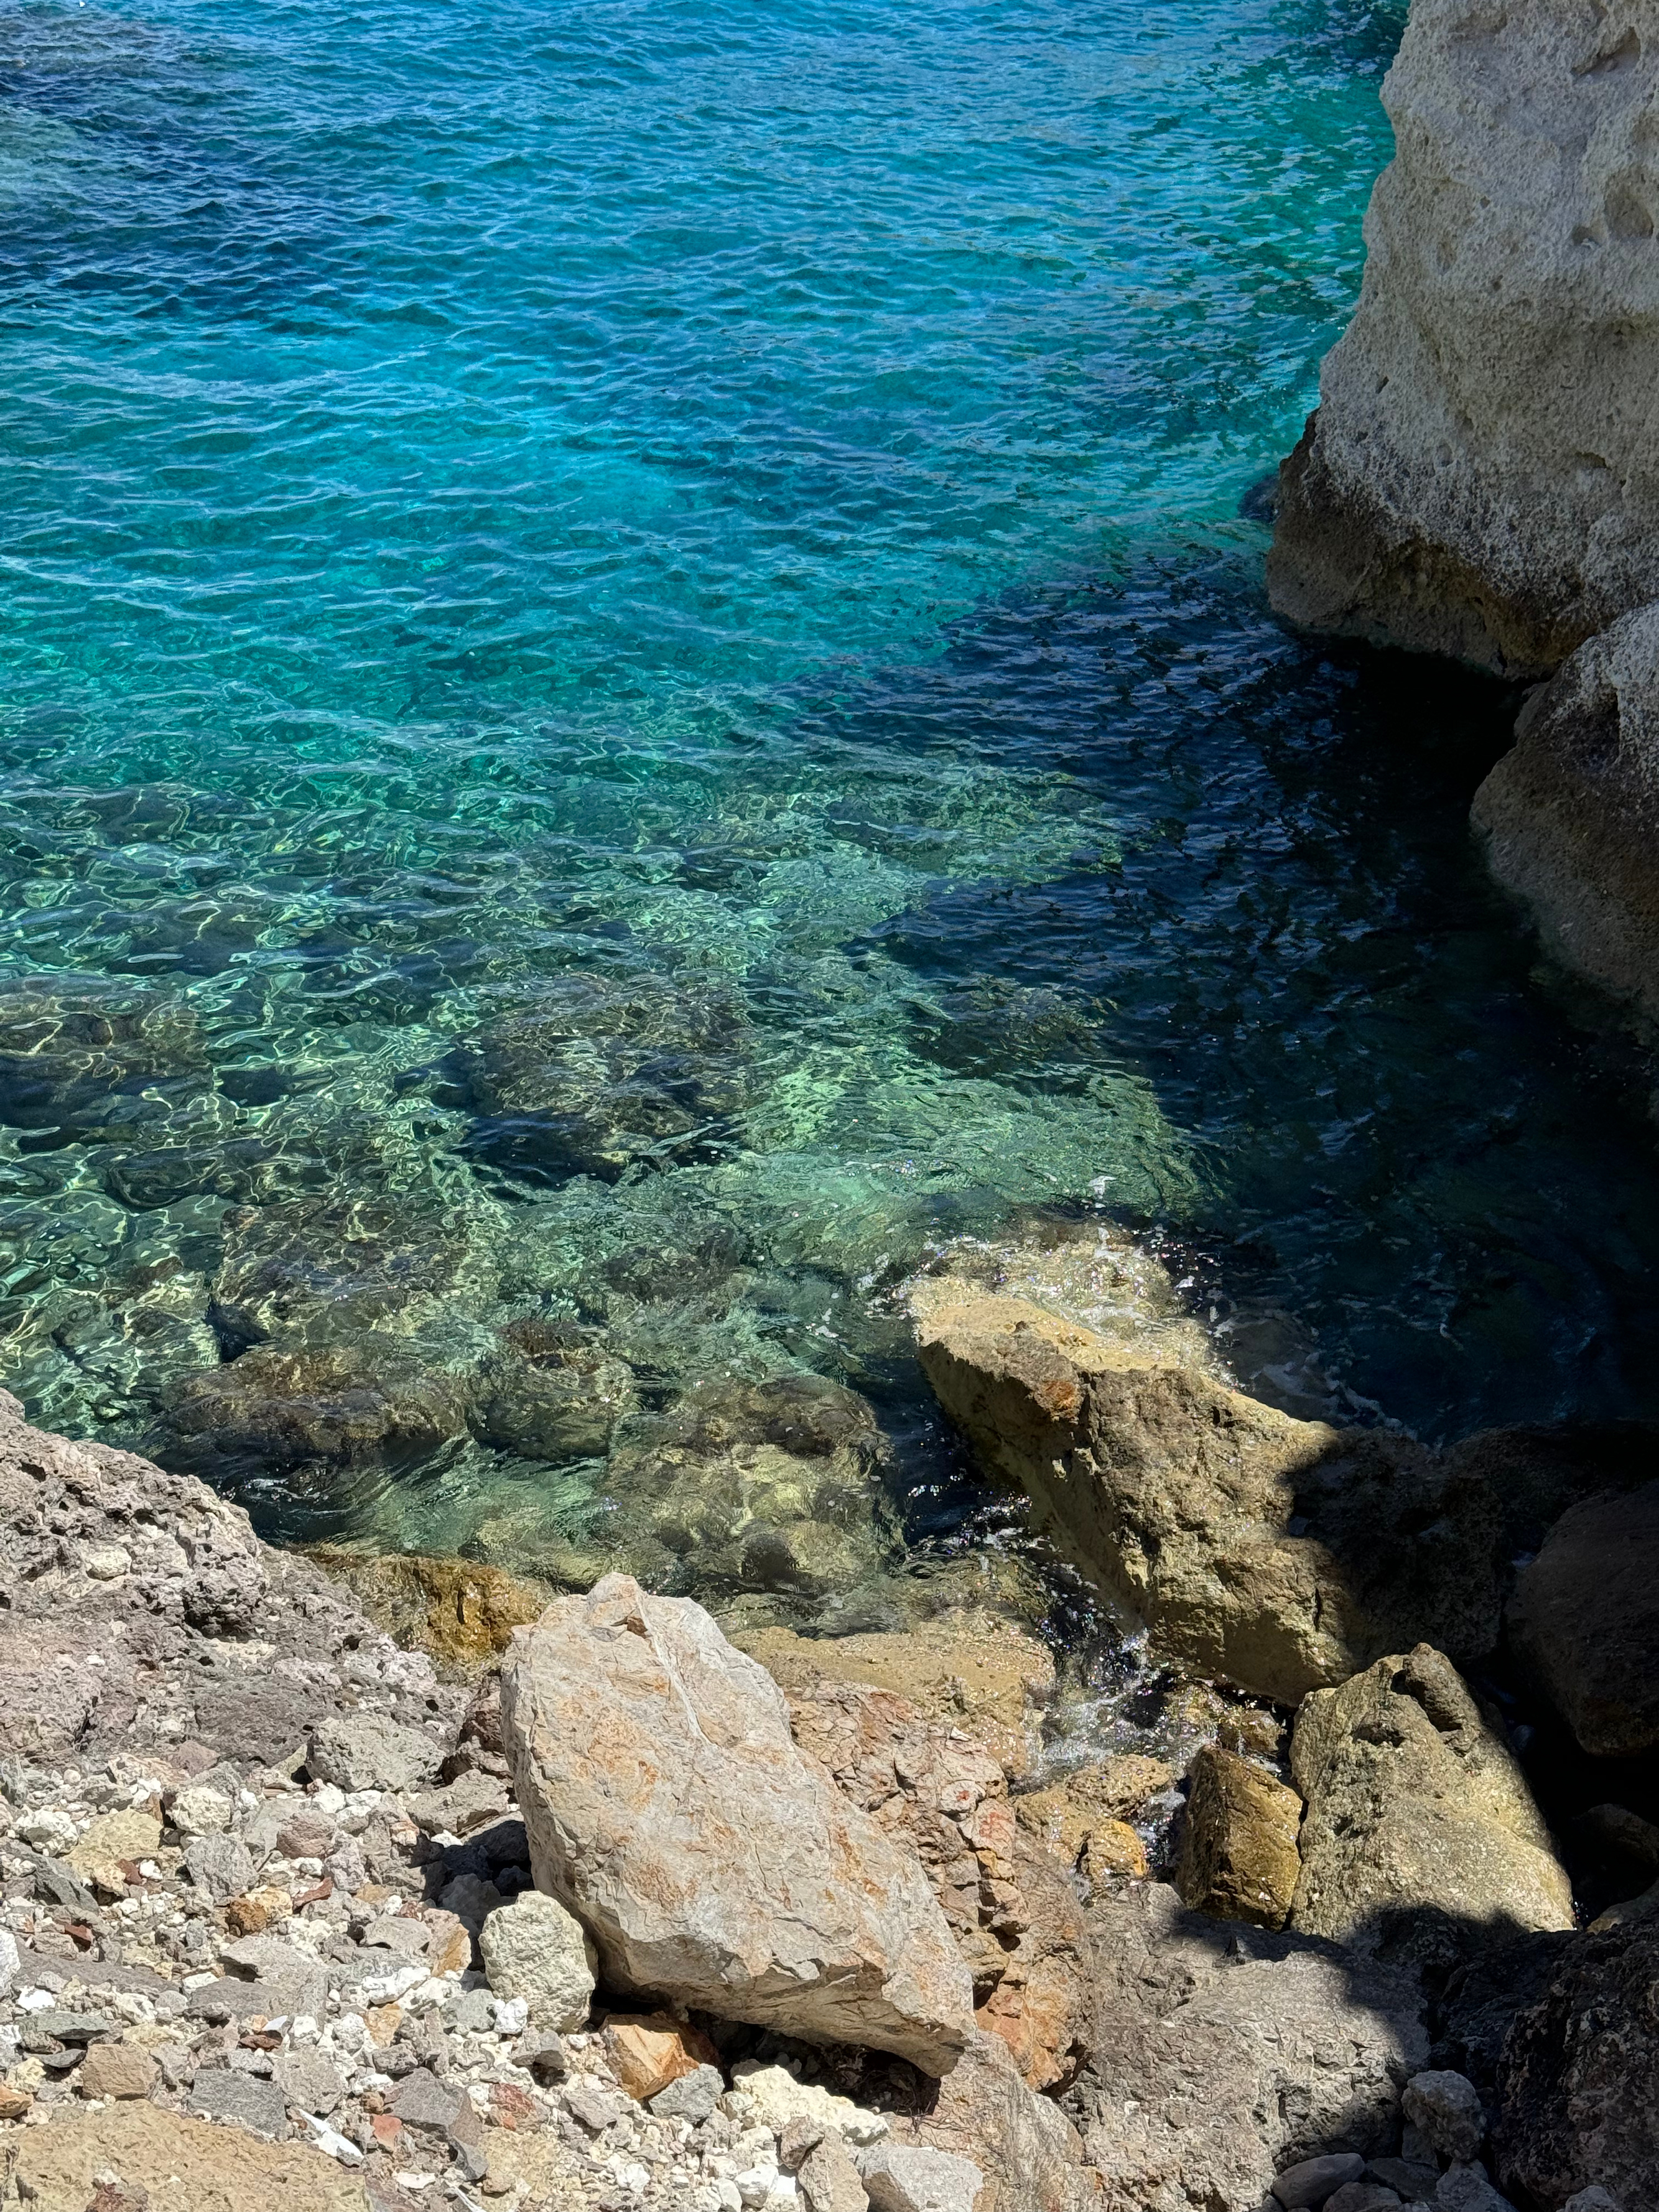 Capturing the mesmerizing close-up view of the tranquil waters in Milos, Greece, with gentle ripples reflecting the serene beauty of the coastline.